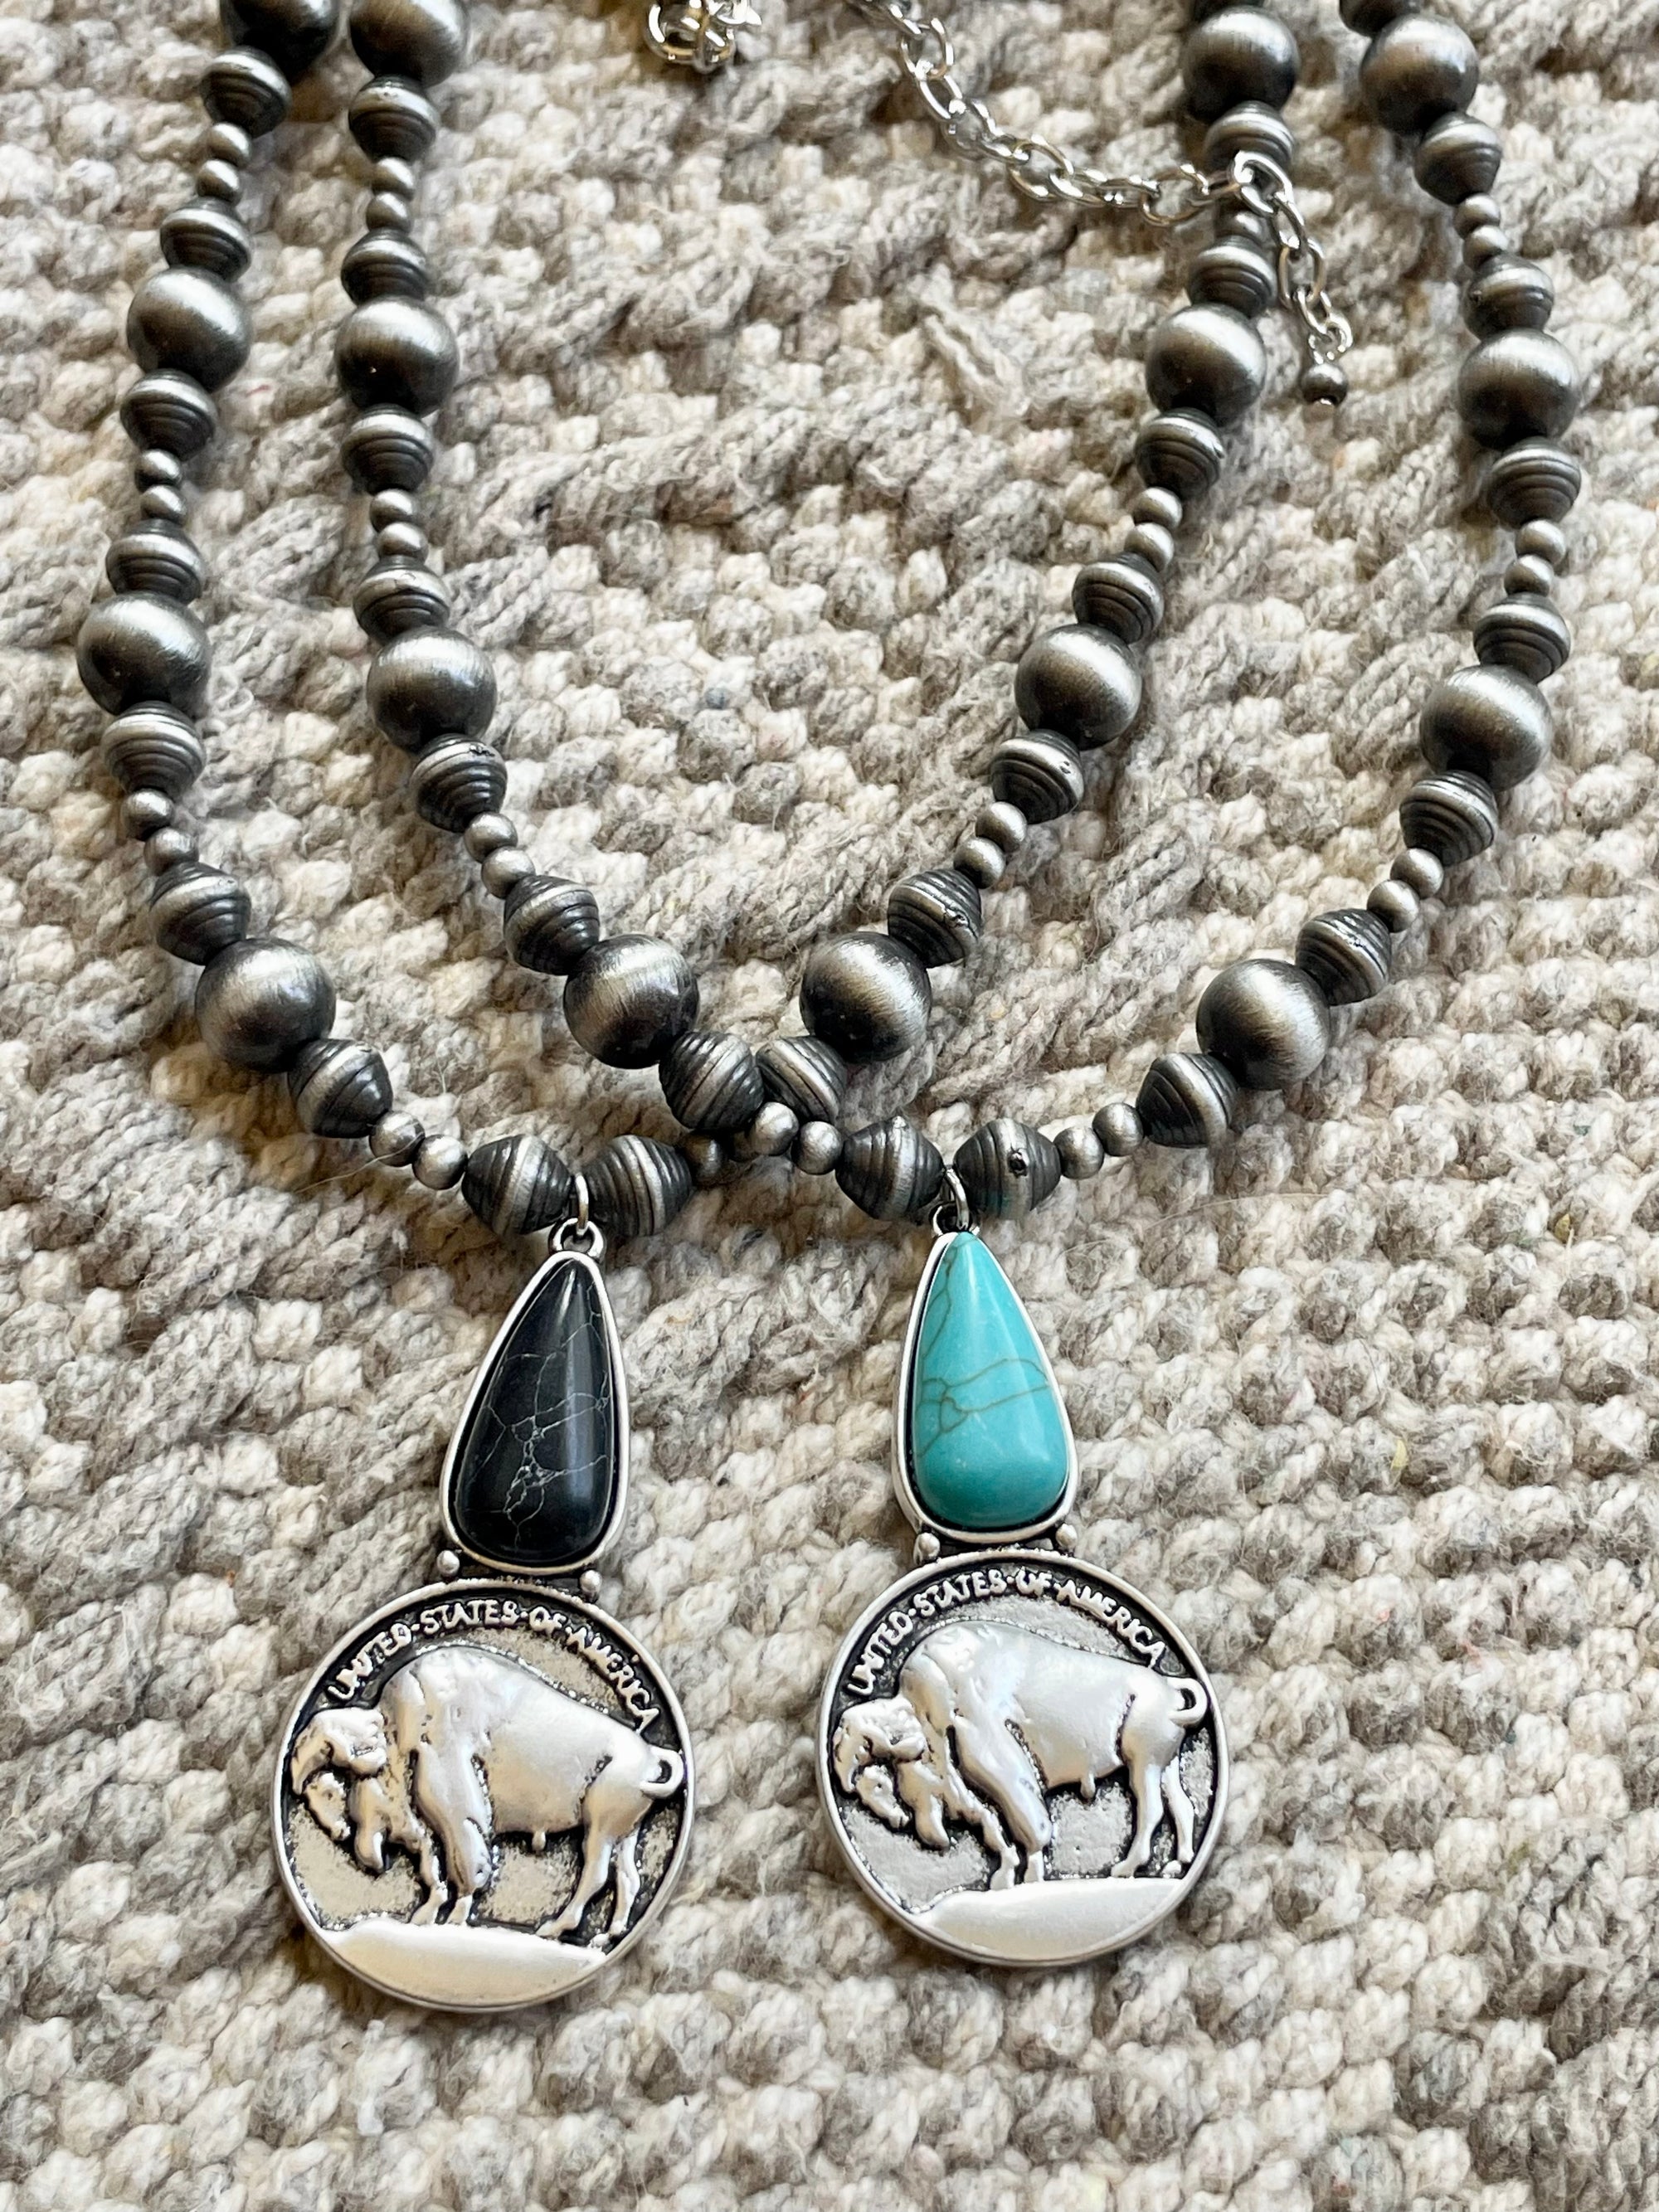 Whitman Fashion Navajo Necklace With Teardrop Coin Pendant - 20"